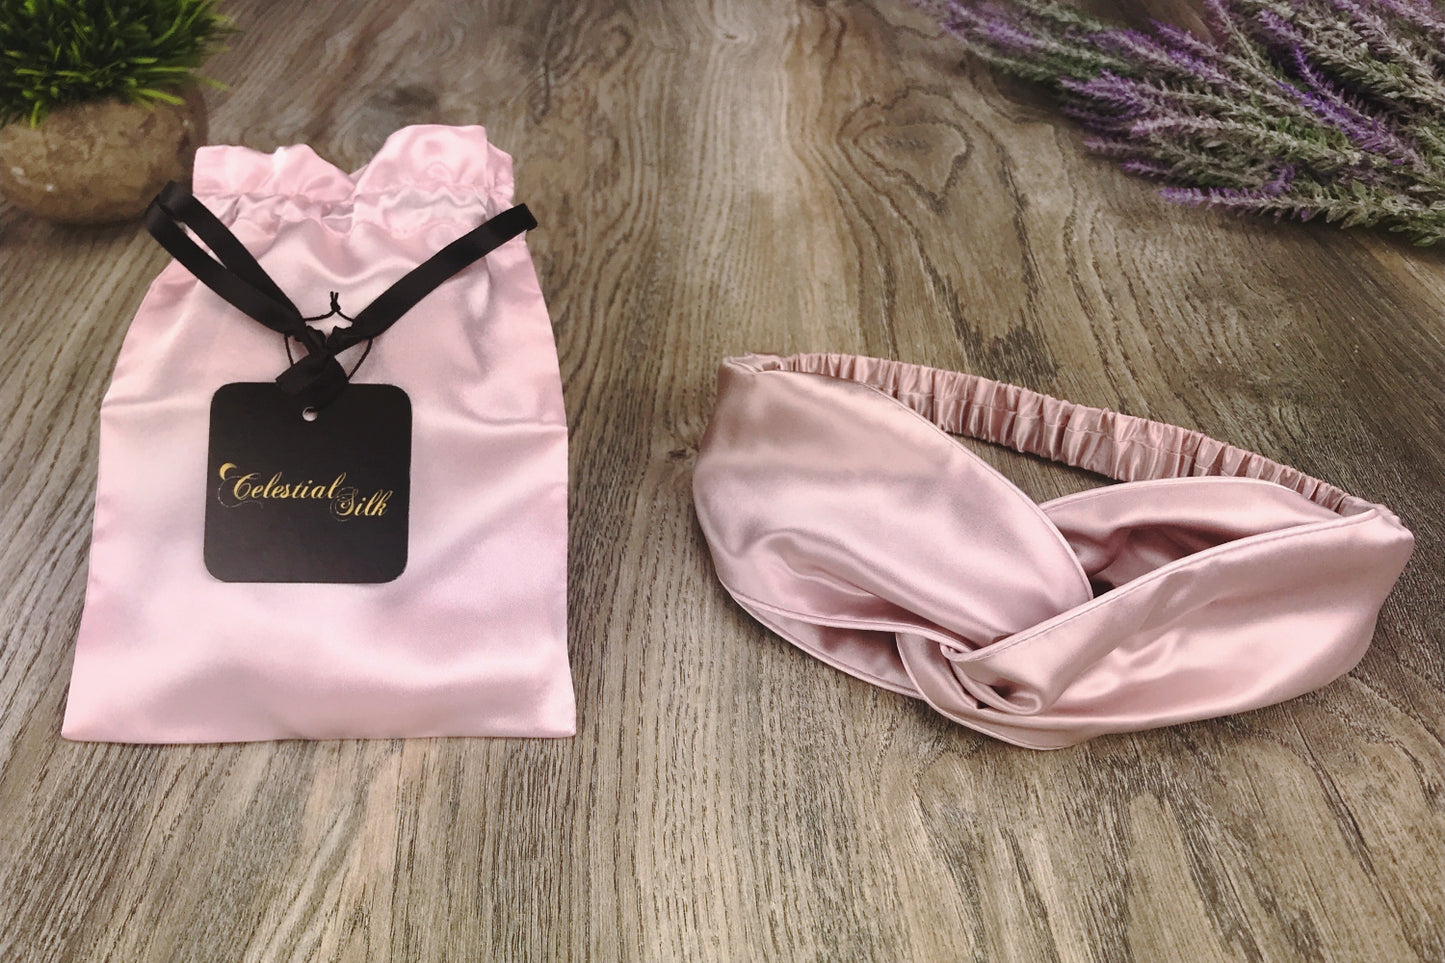 celestial silk twisted vintage pink silk headband for hair on counter with lavender and satin gift bag